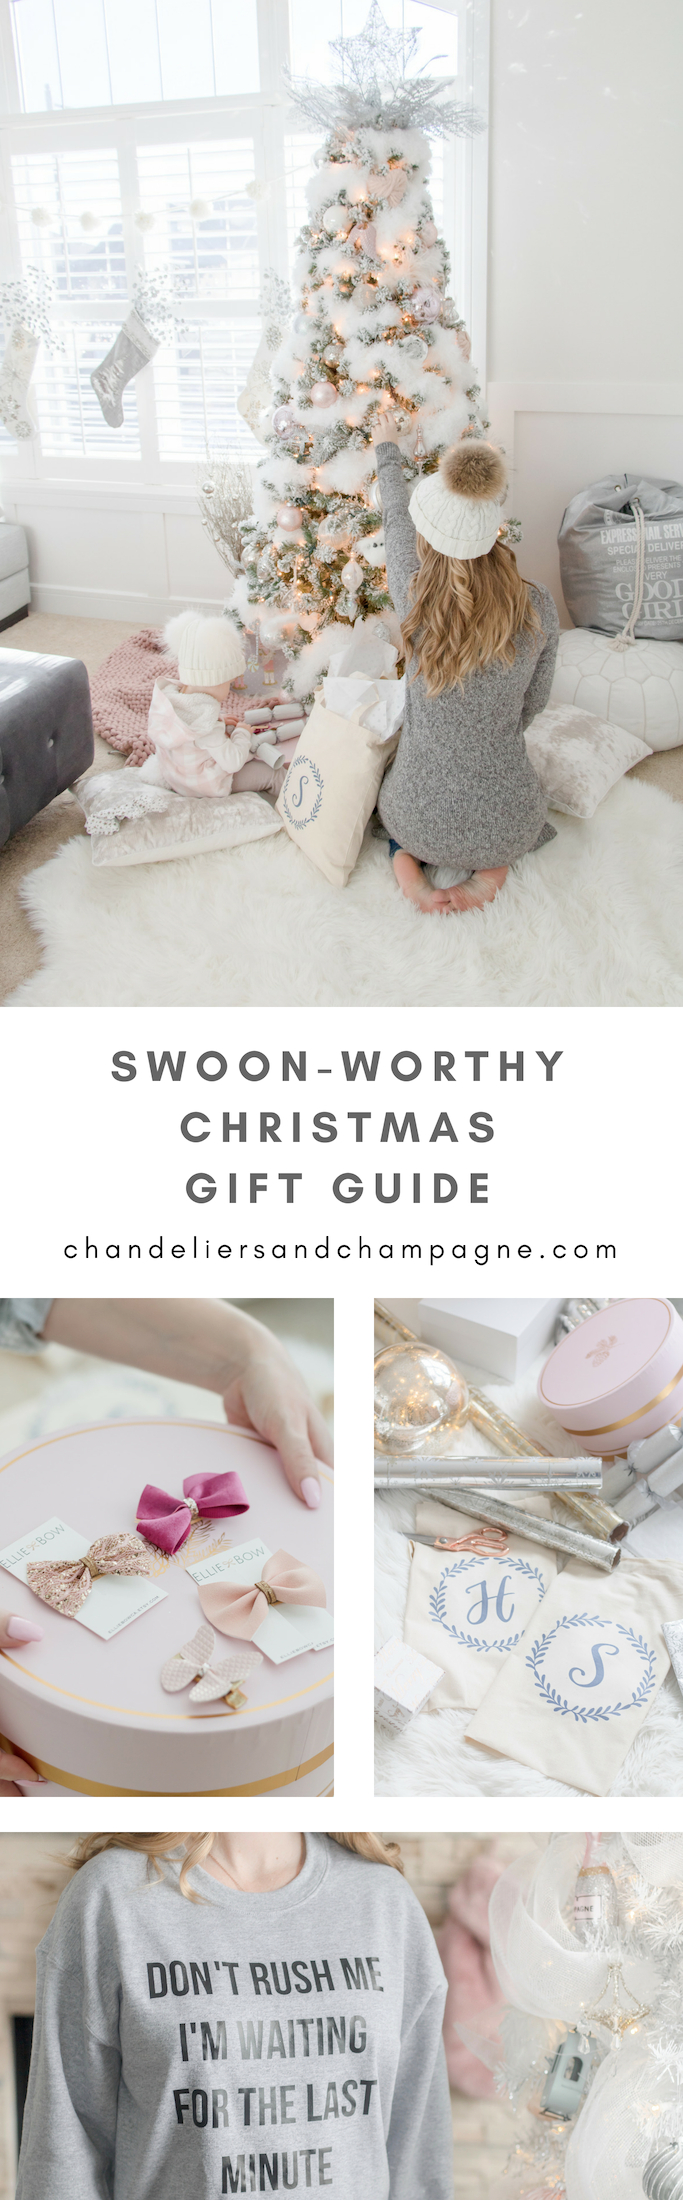 Fluffy white Christmas tree styling and Christmas gift and wrapping ideas for 2018 - glamorous Christmas gift ideas - girly Christmas gift ideas 